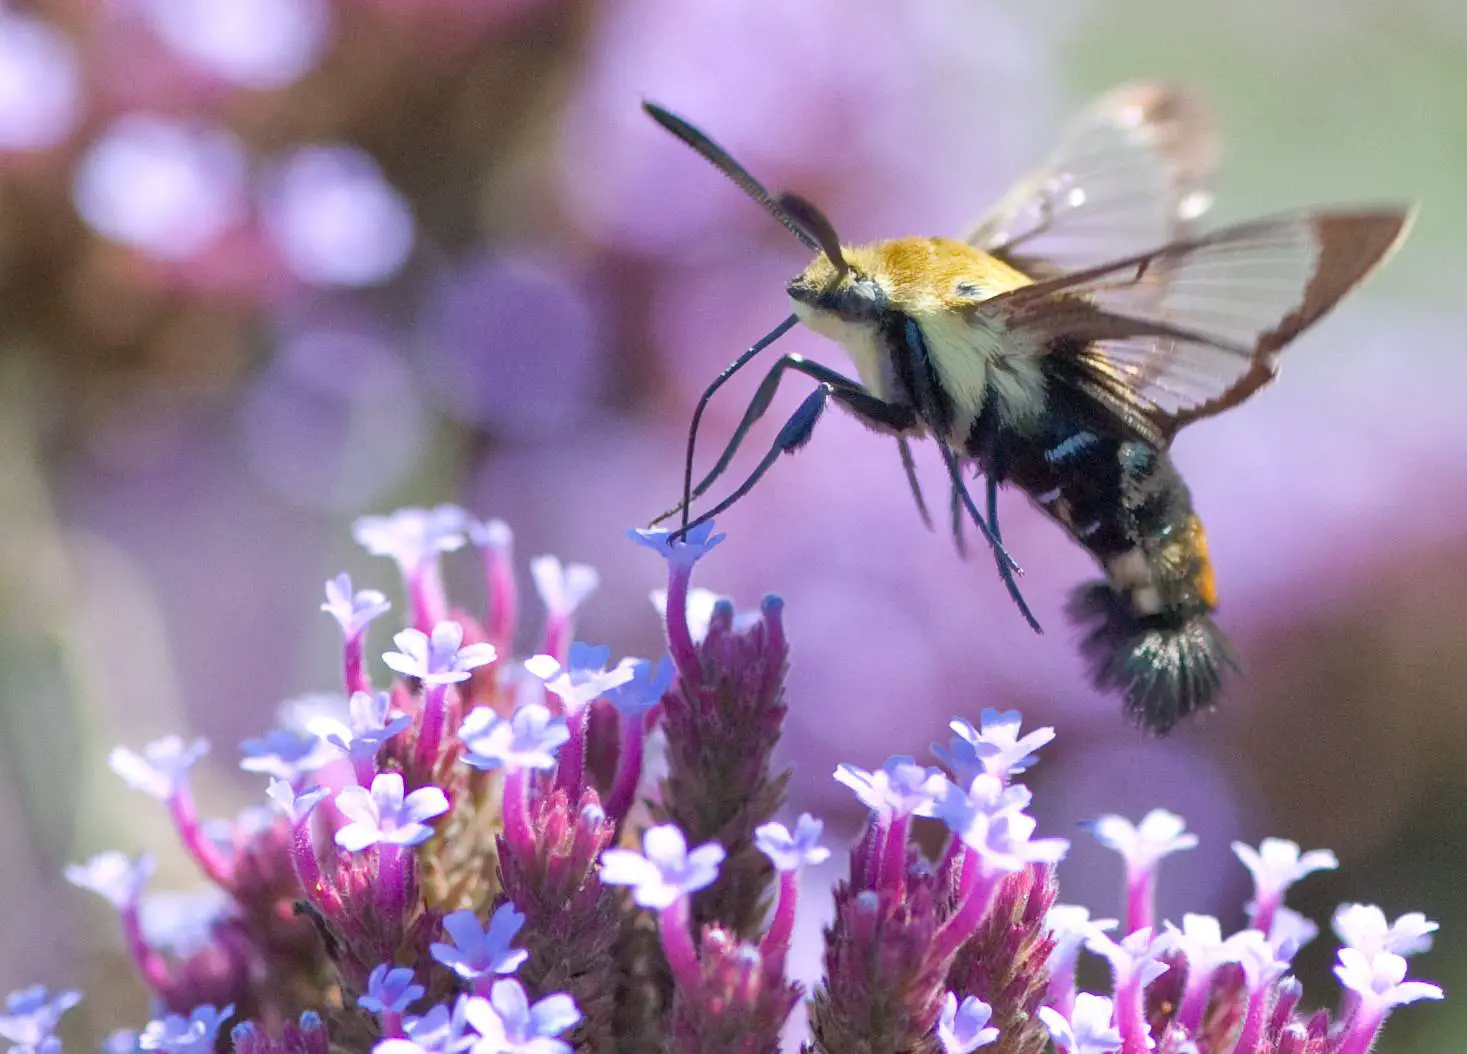 Organic farms are better for better species diversity including bees and other insects, Oxford University study says. 